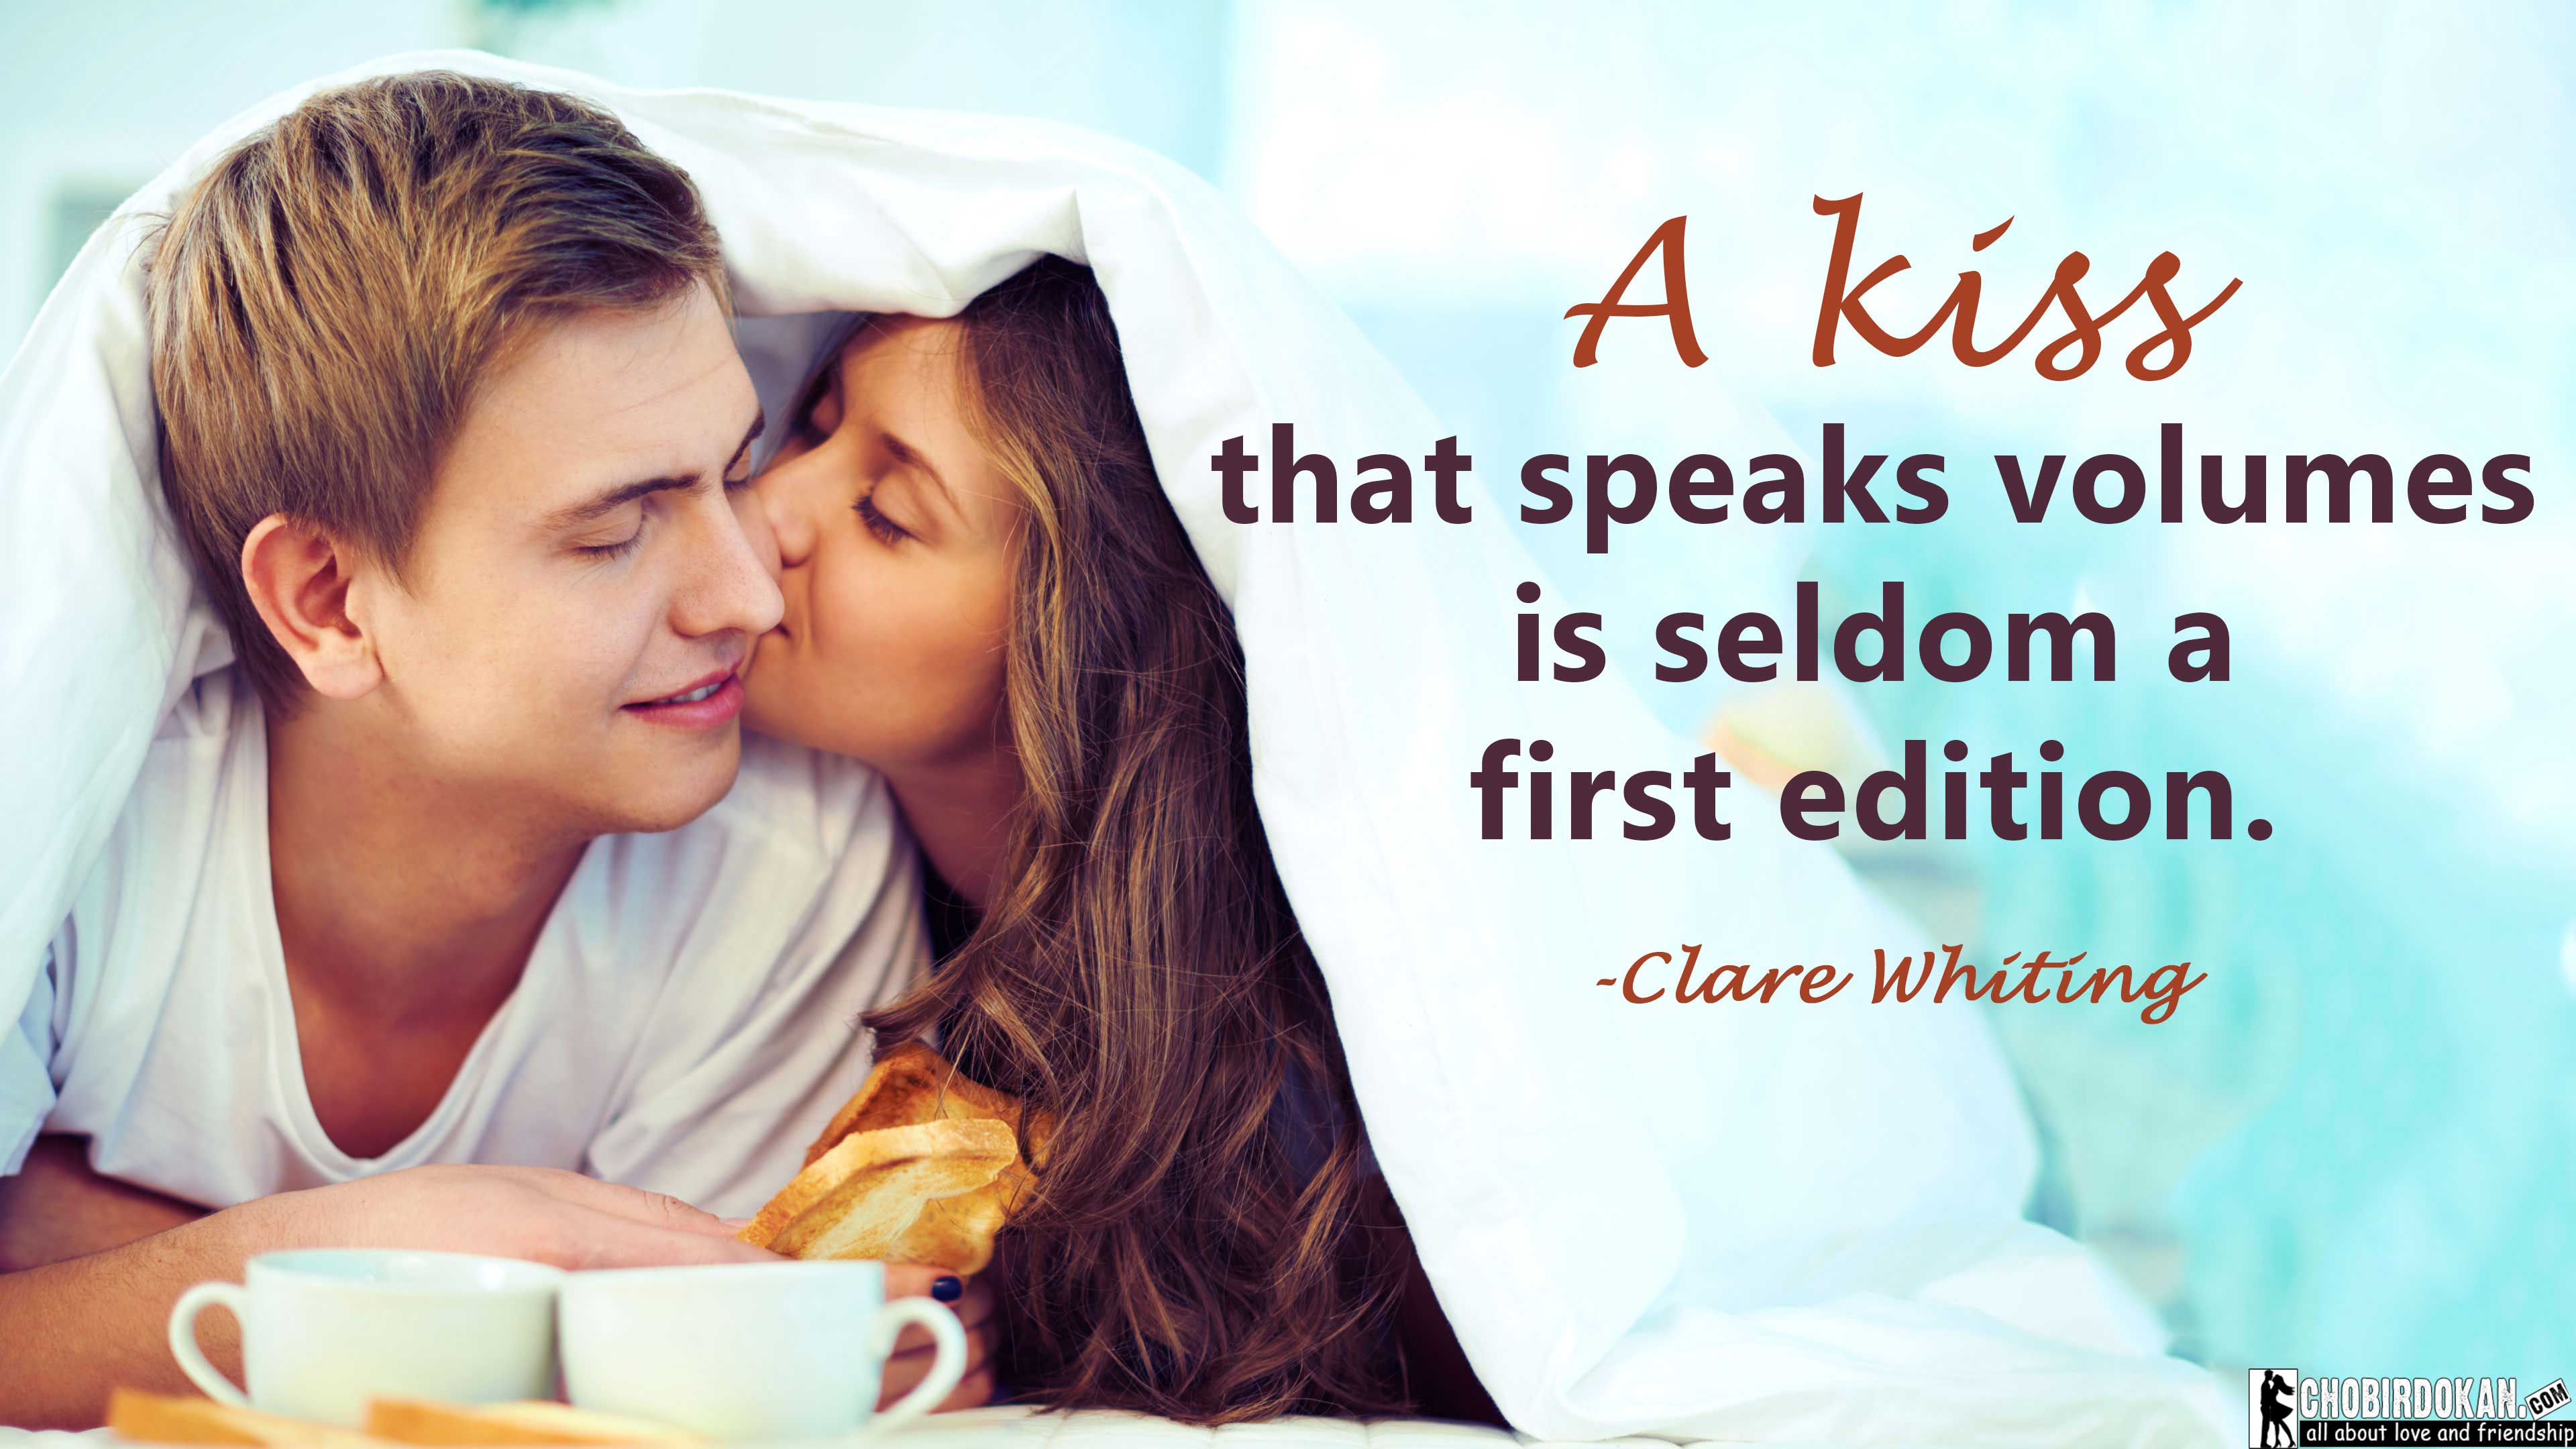 Cute Kissing Quotes Image For Her Him -Best Love Kiss Quotes